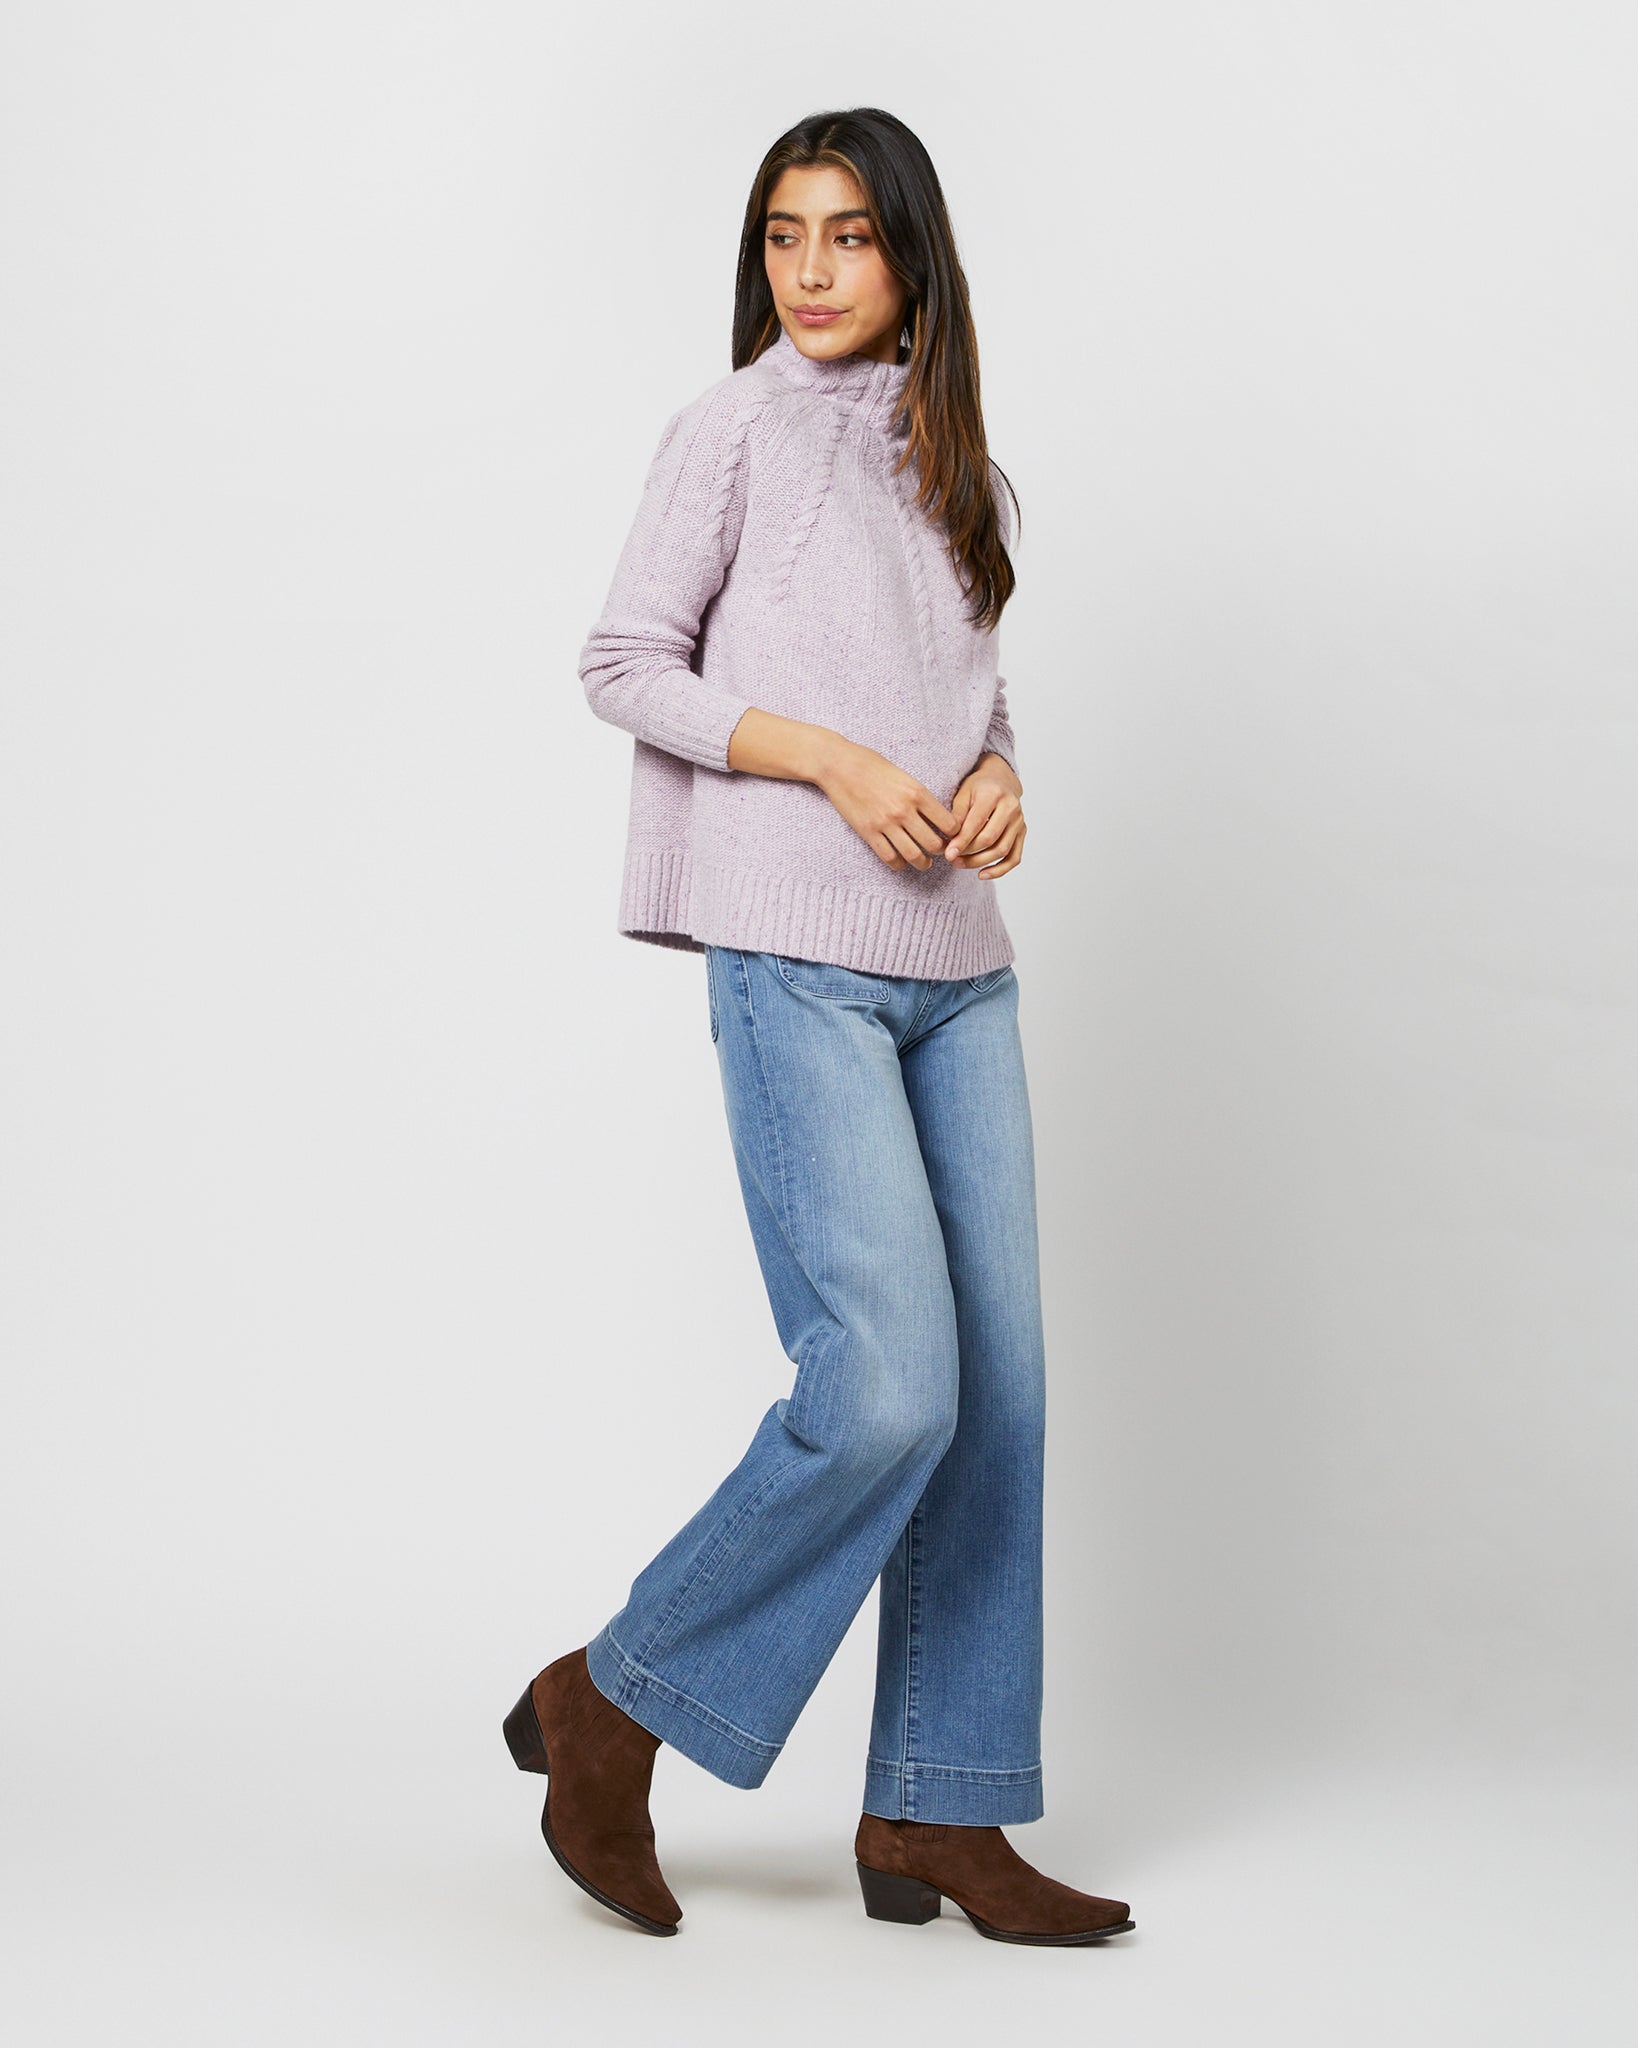 Elsey Funnel-Neck Sweater in Blossom Cashmere